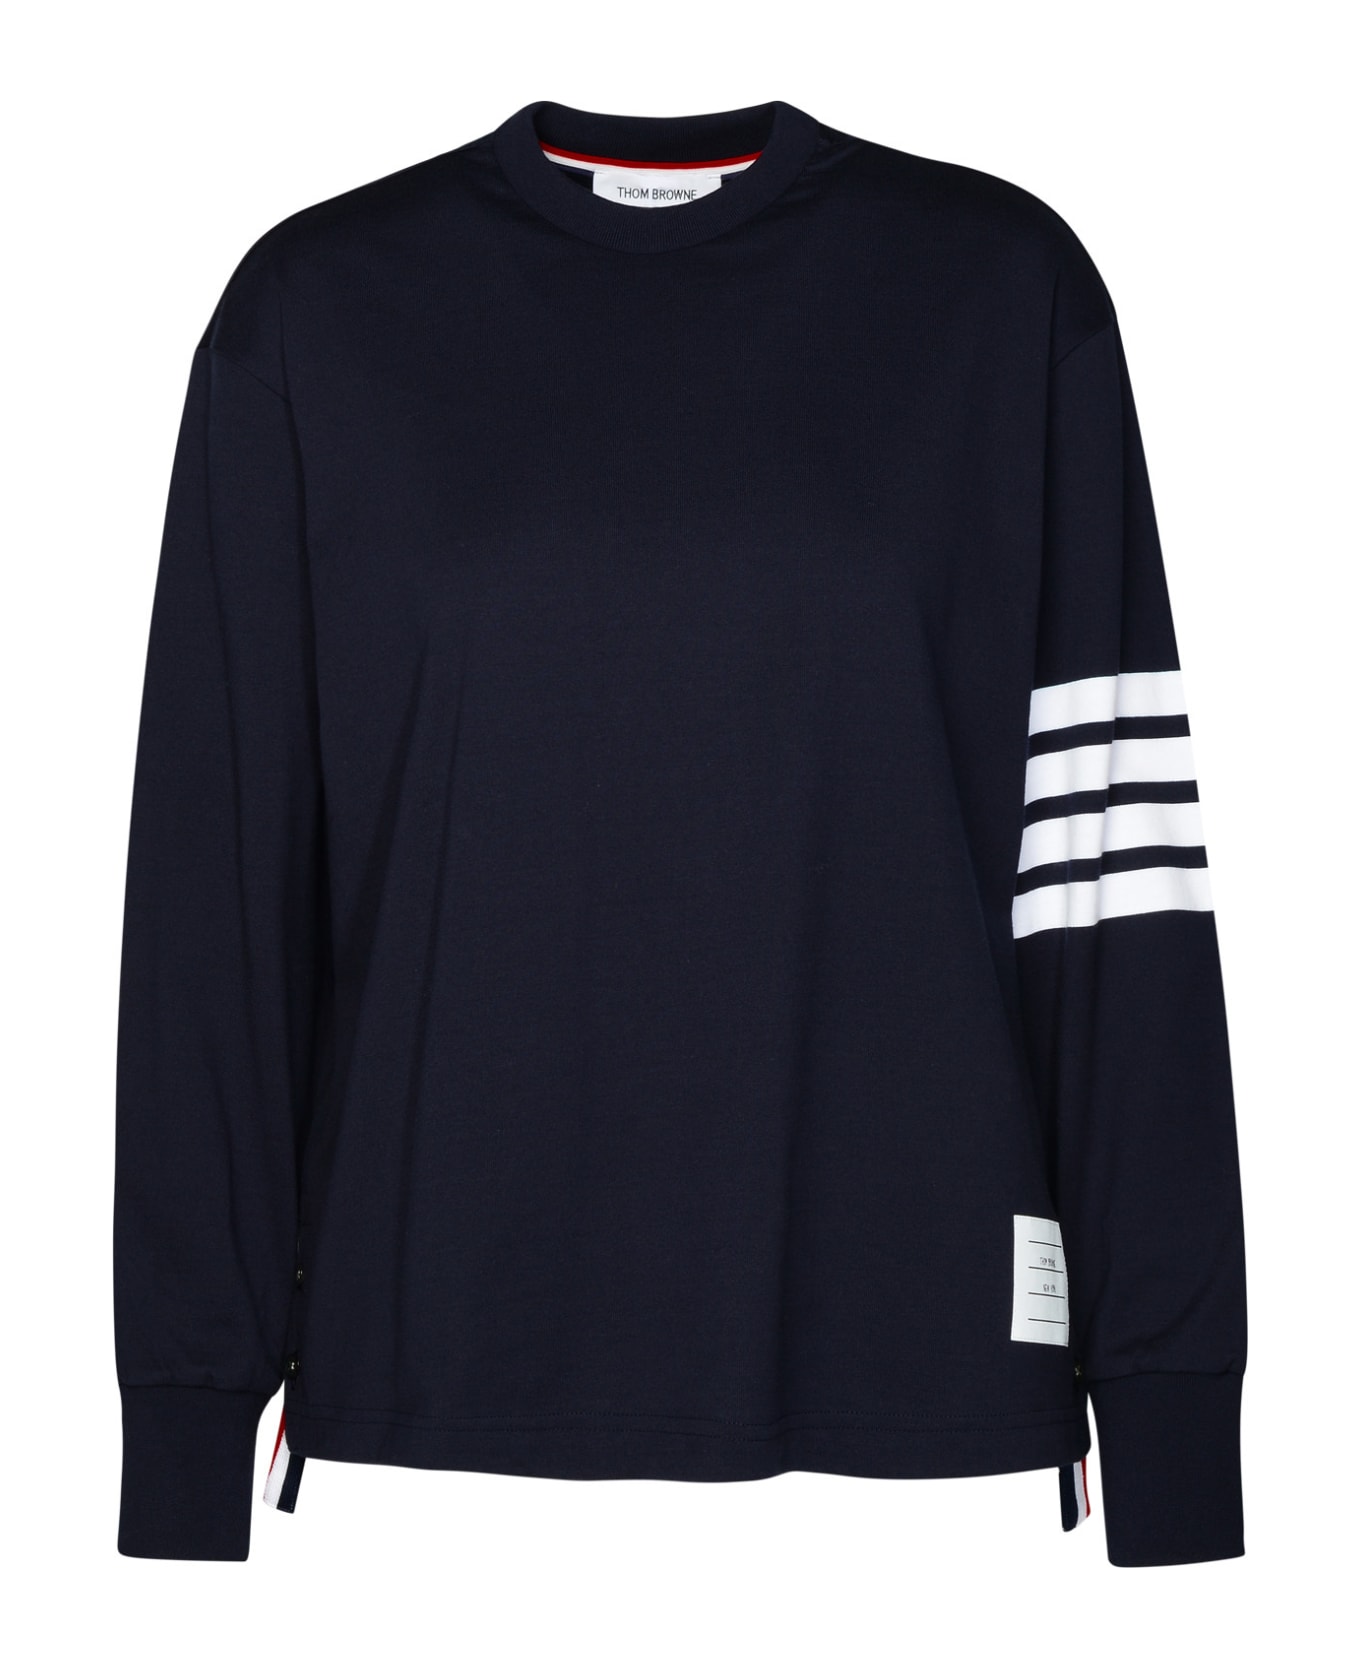 Thom Browne Navy Cotton Sweater - BLUE